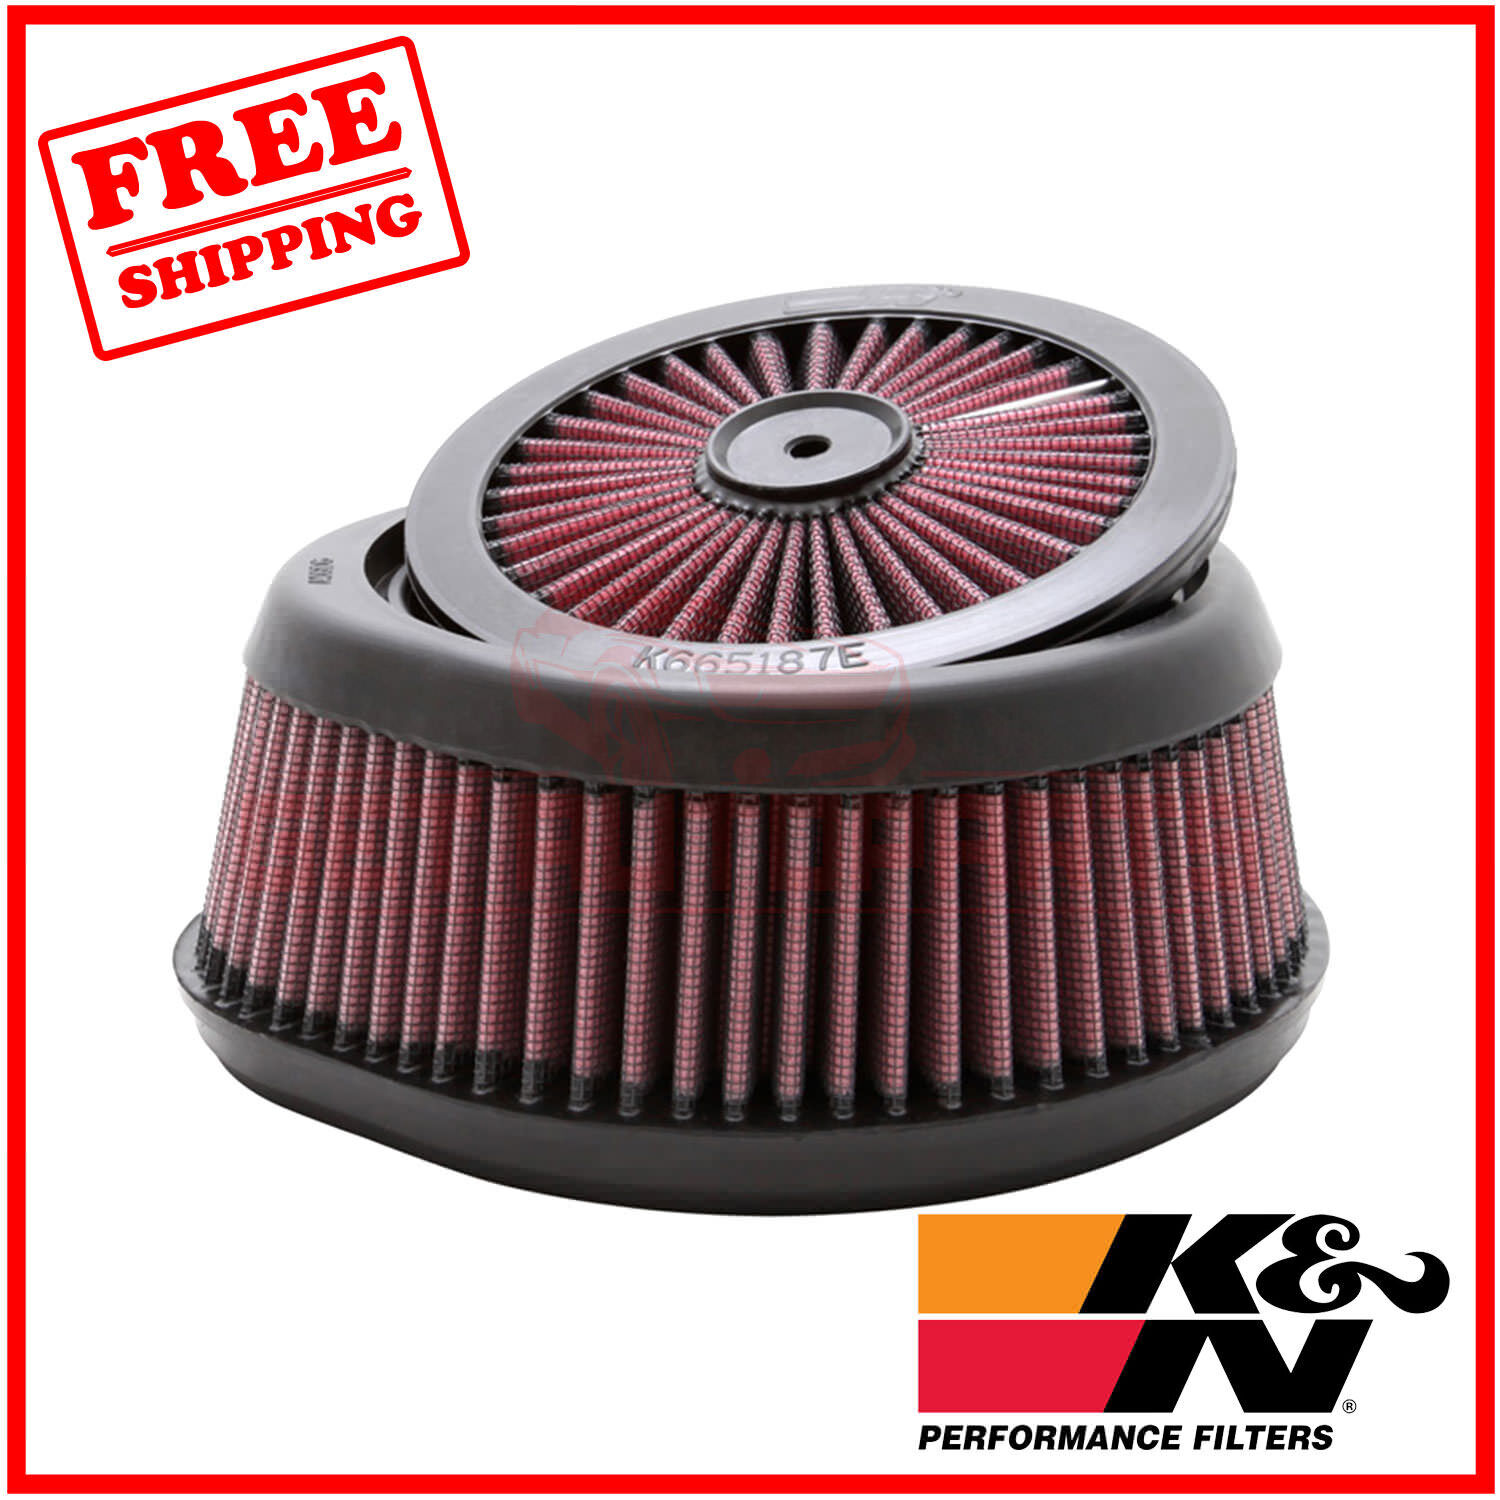 K&N Replacement Air Filter fits Yamaha YZ125 1997-2019